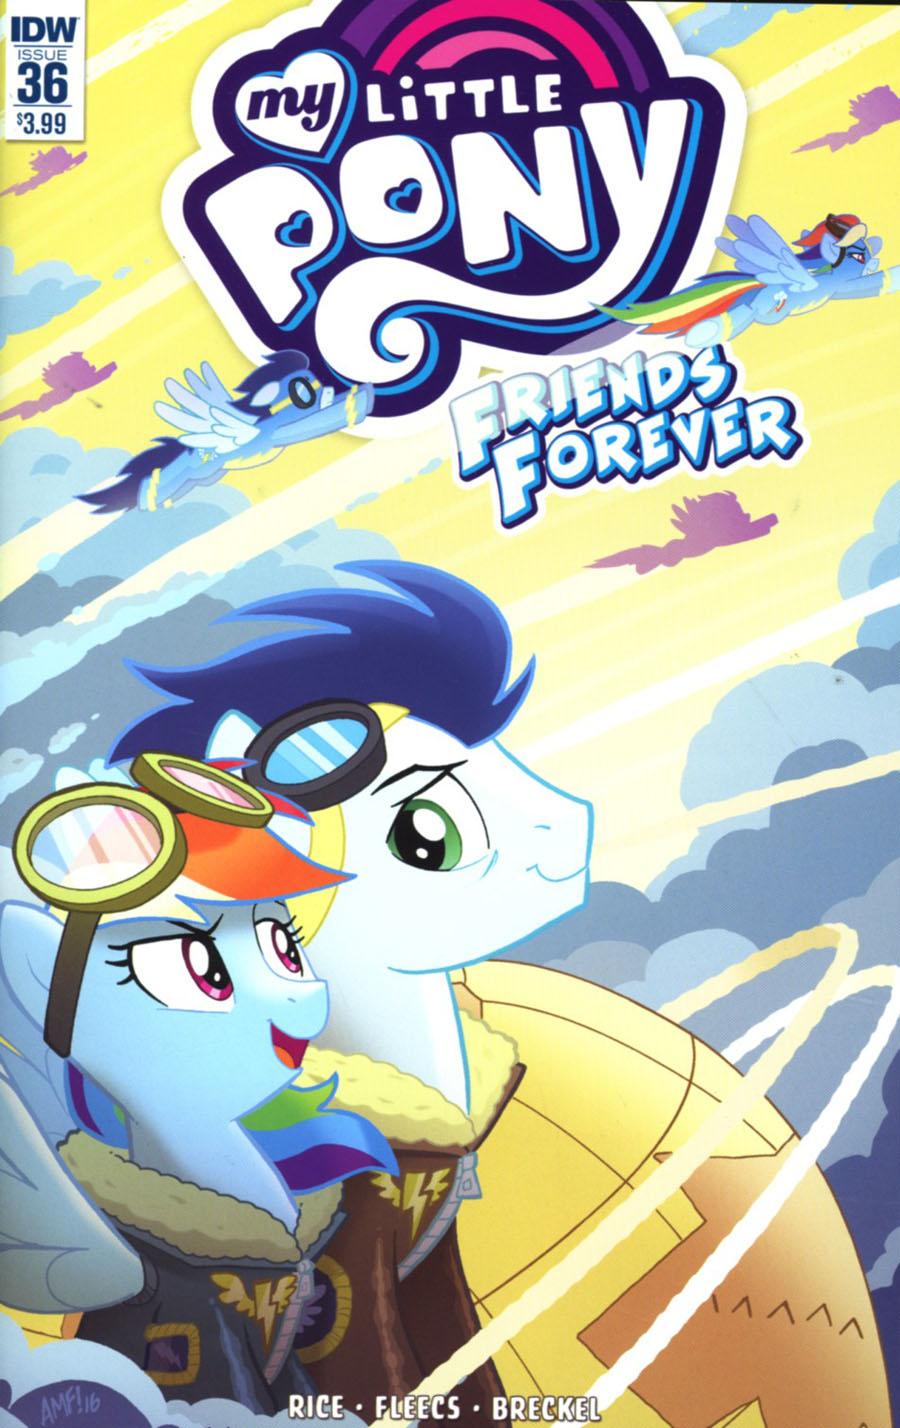 My Little Pony Friends Forever Vol. 1 #36